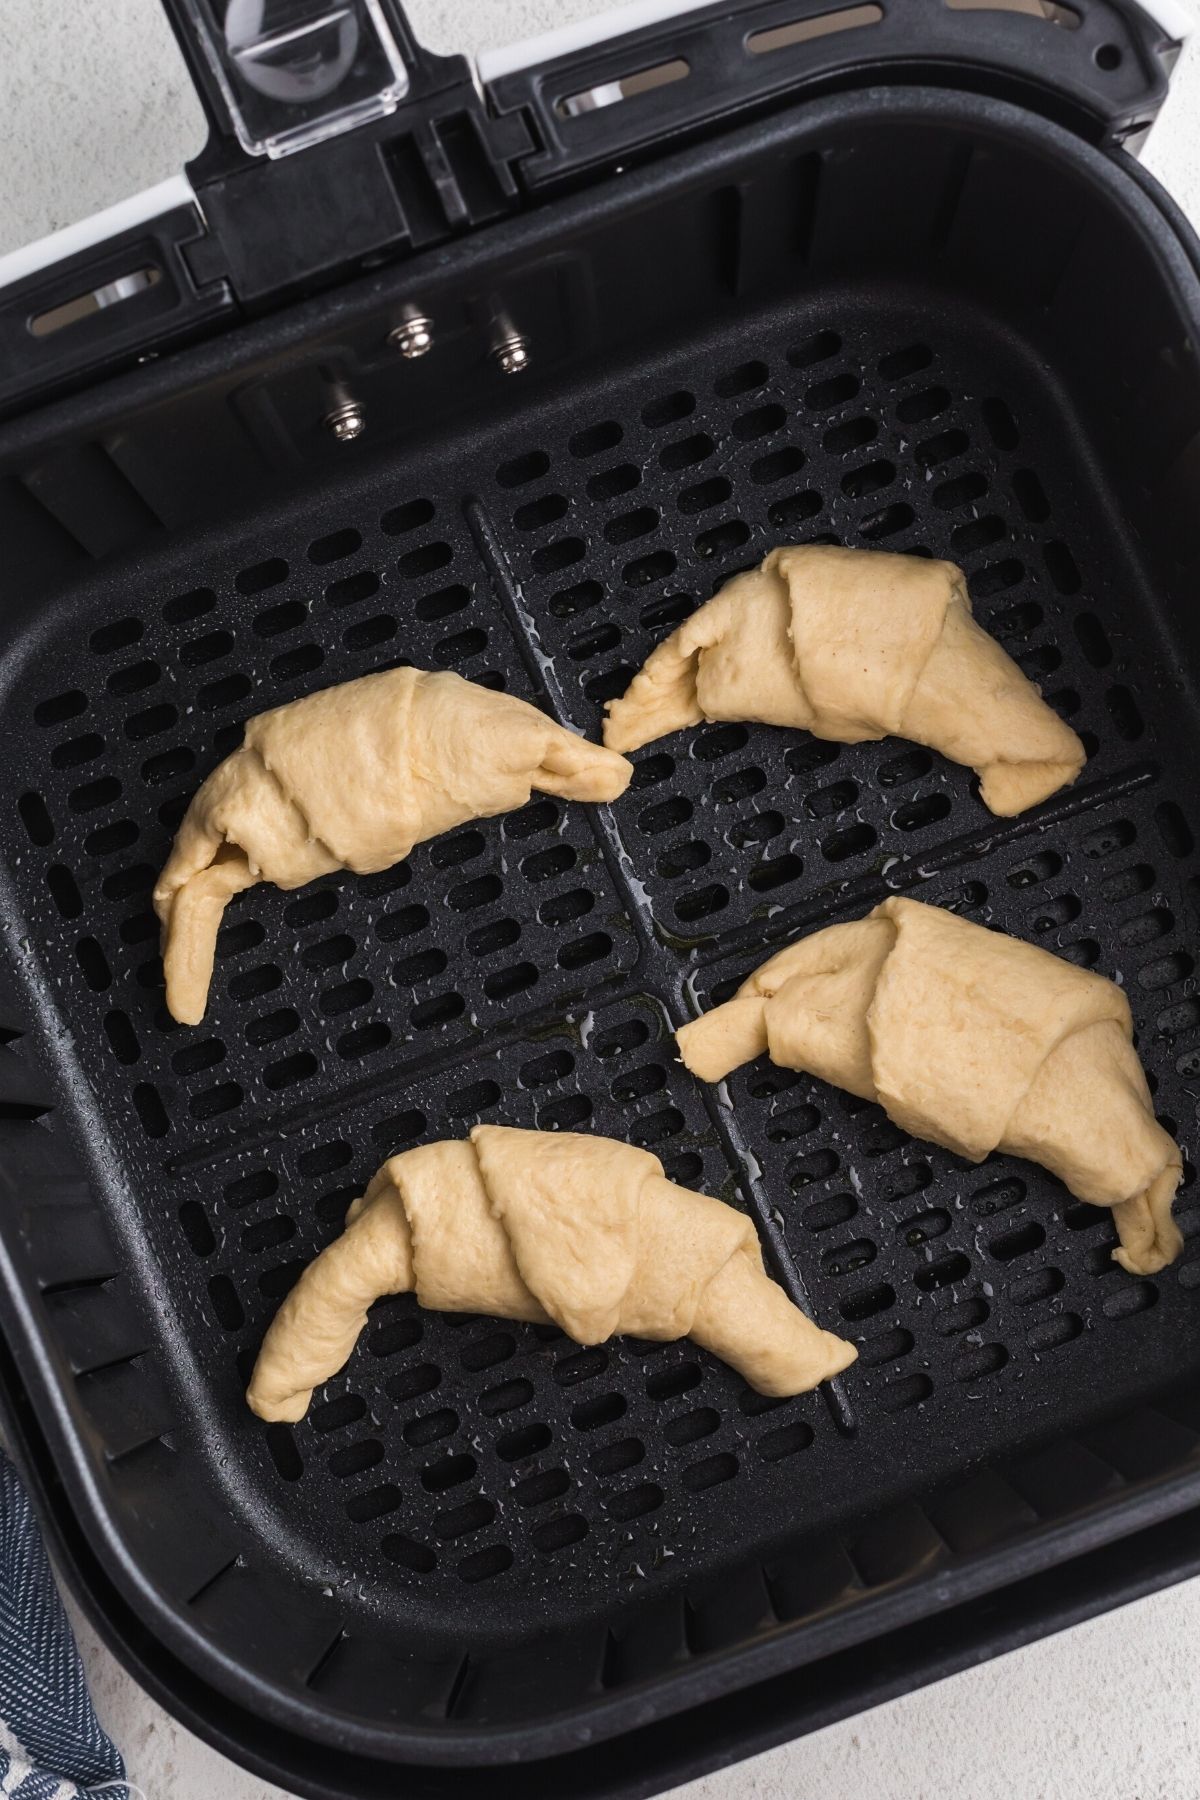 Crescent rolls filled with chocolate placed in the air fryer basket